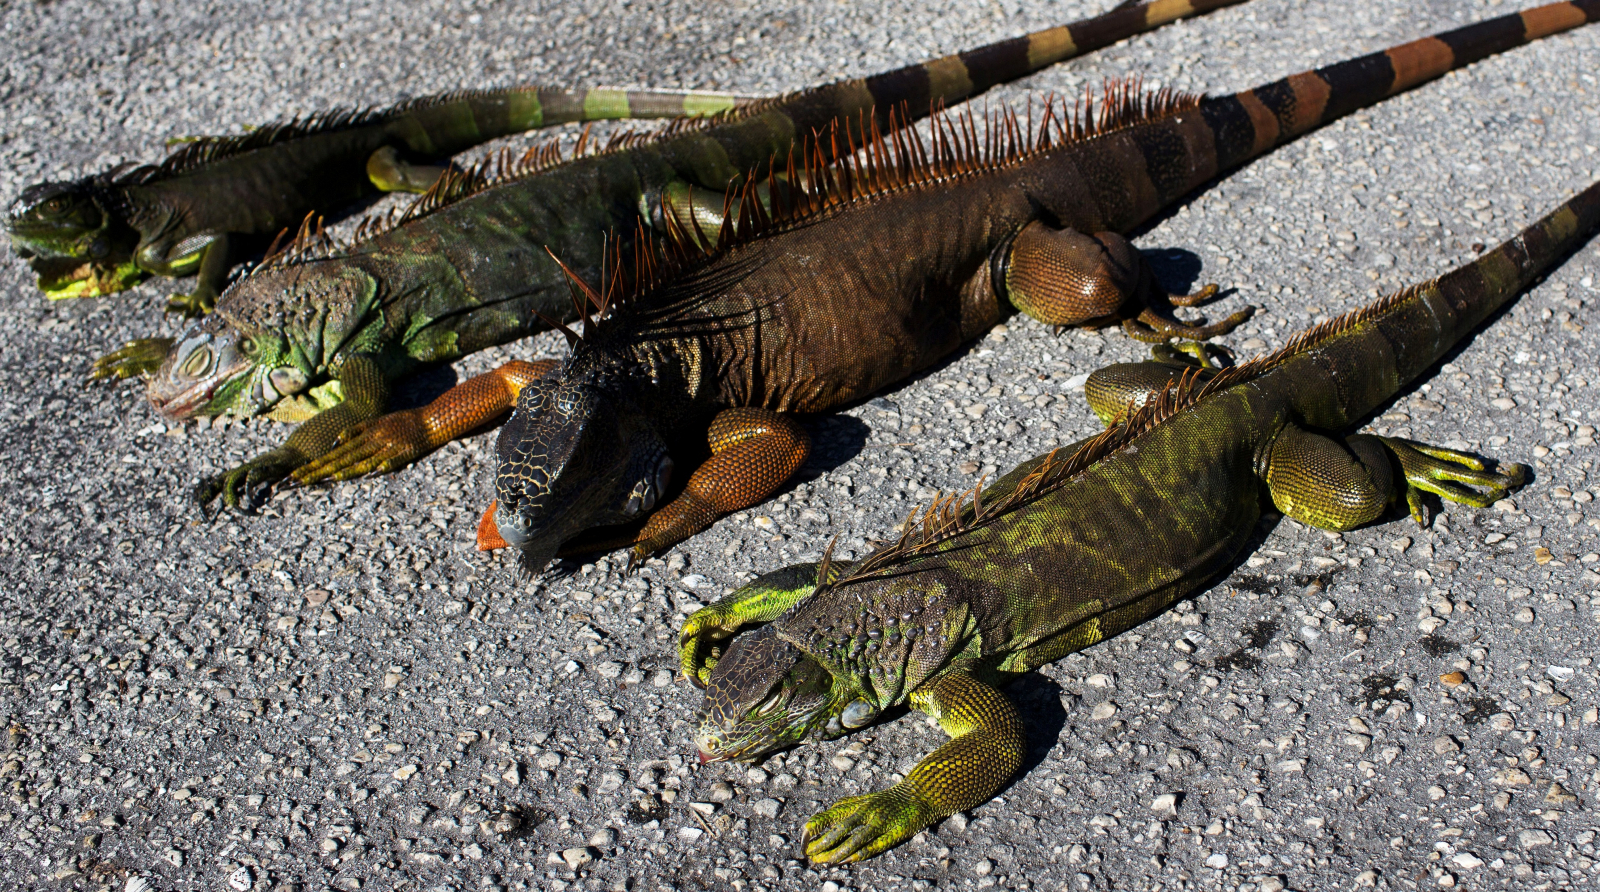 Frozen iguanas falling from trees in Florida due to extreme weather conditions